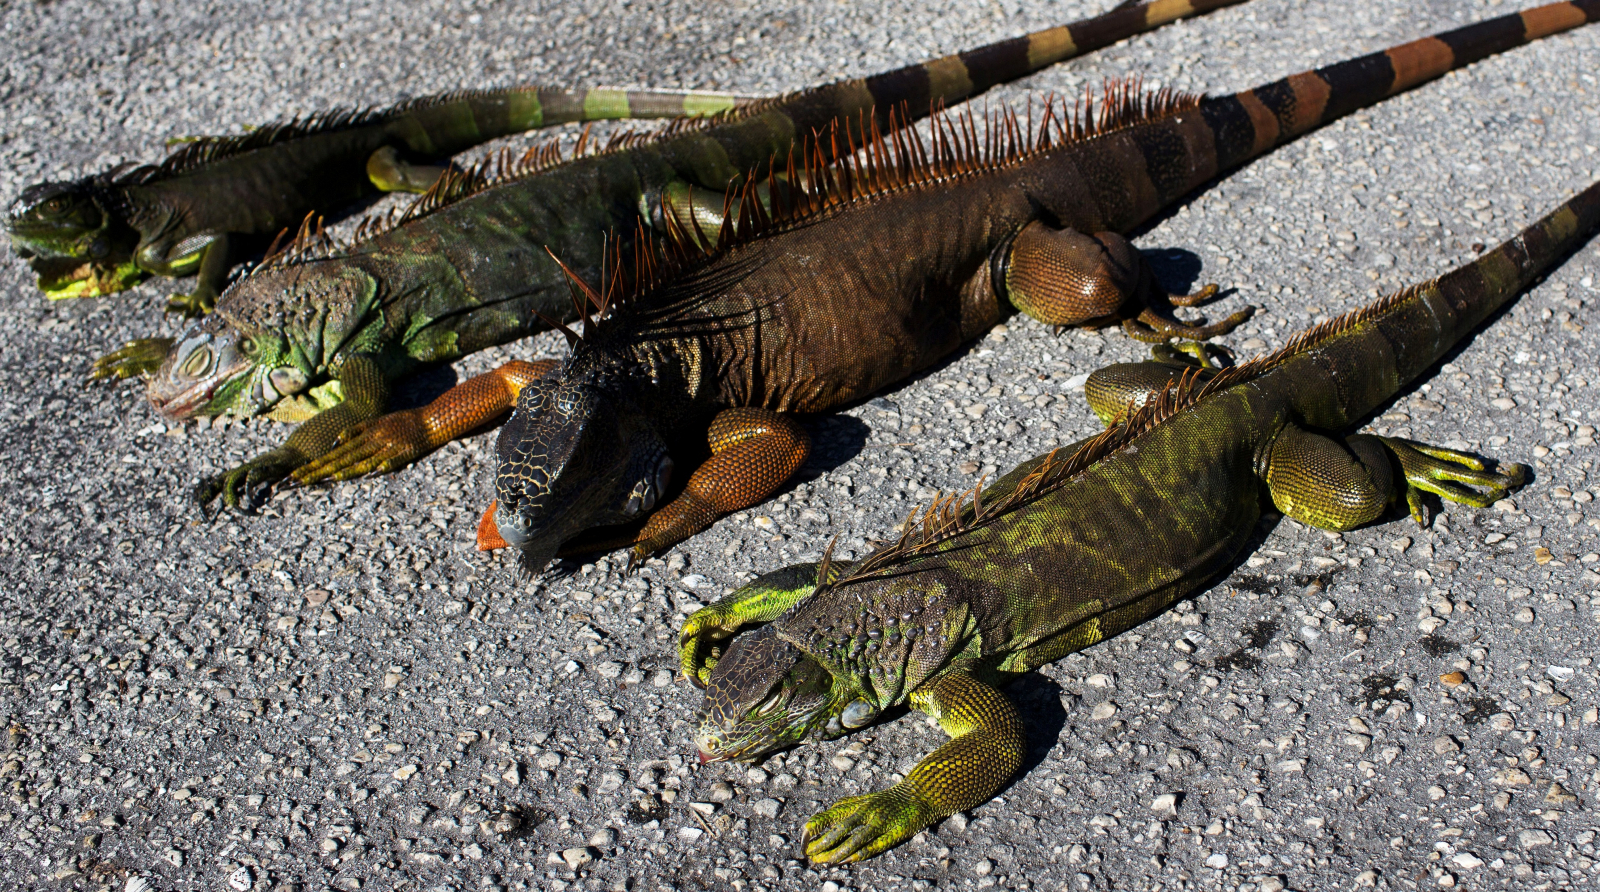 Frozen iguanas falling from trees in Florida due to extreme weather conditions